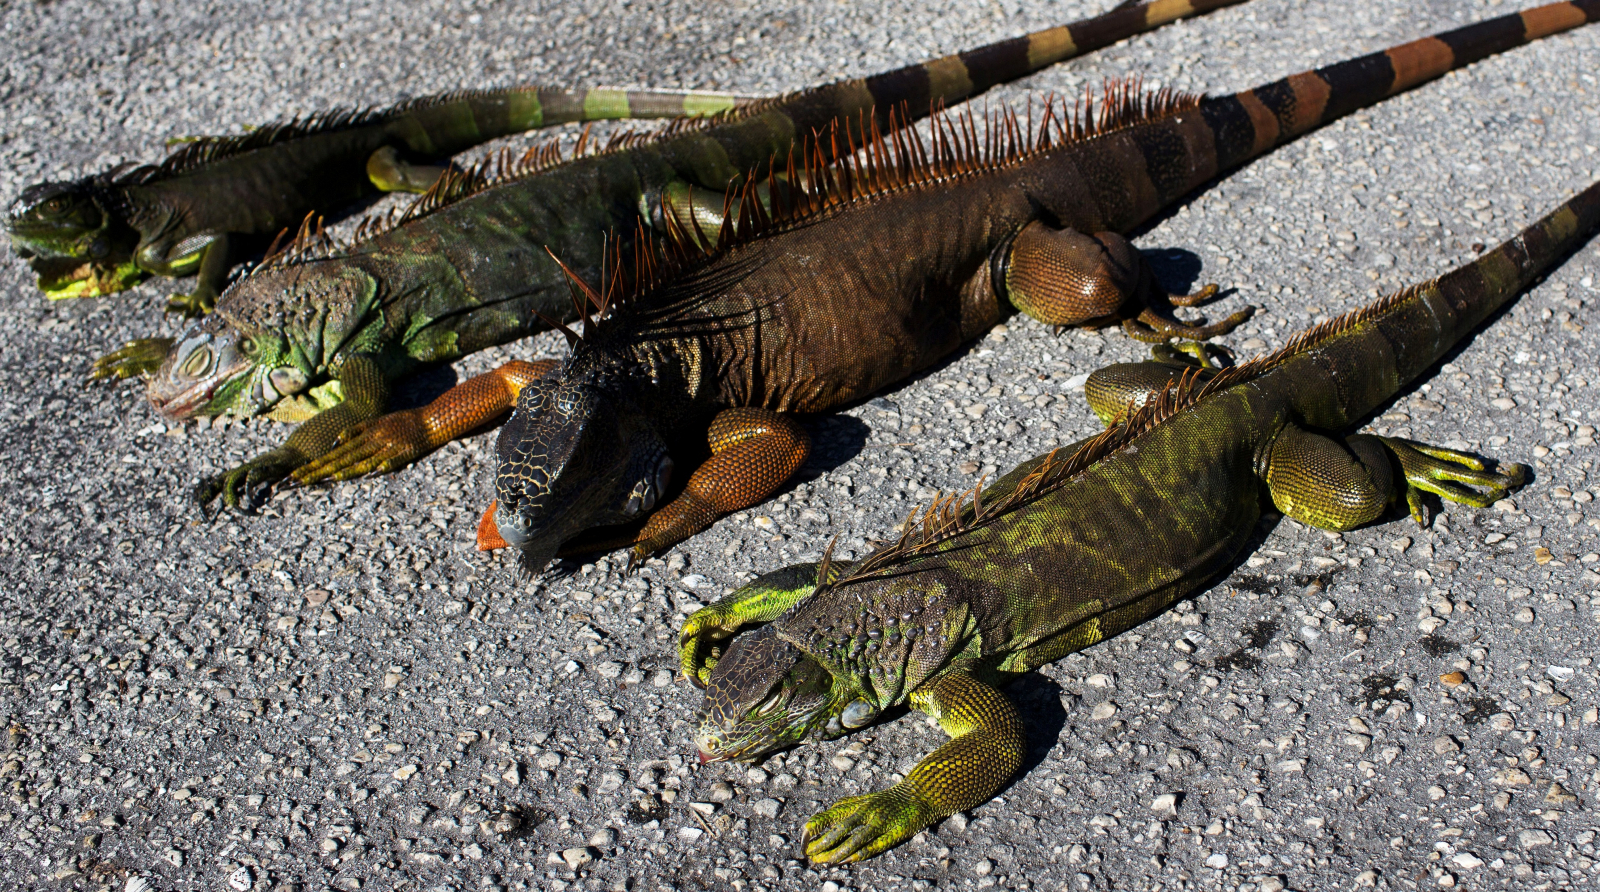 Frozen iguanas falling from trees in Florida due to extreme weather conditions